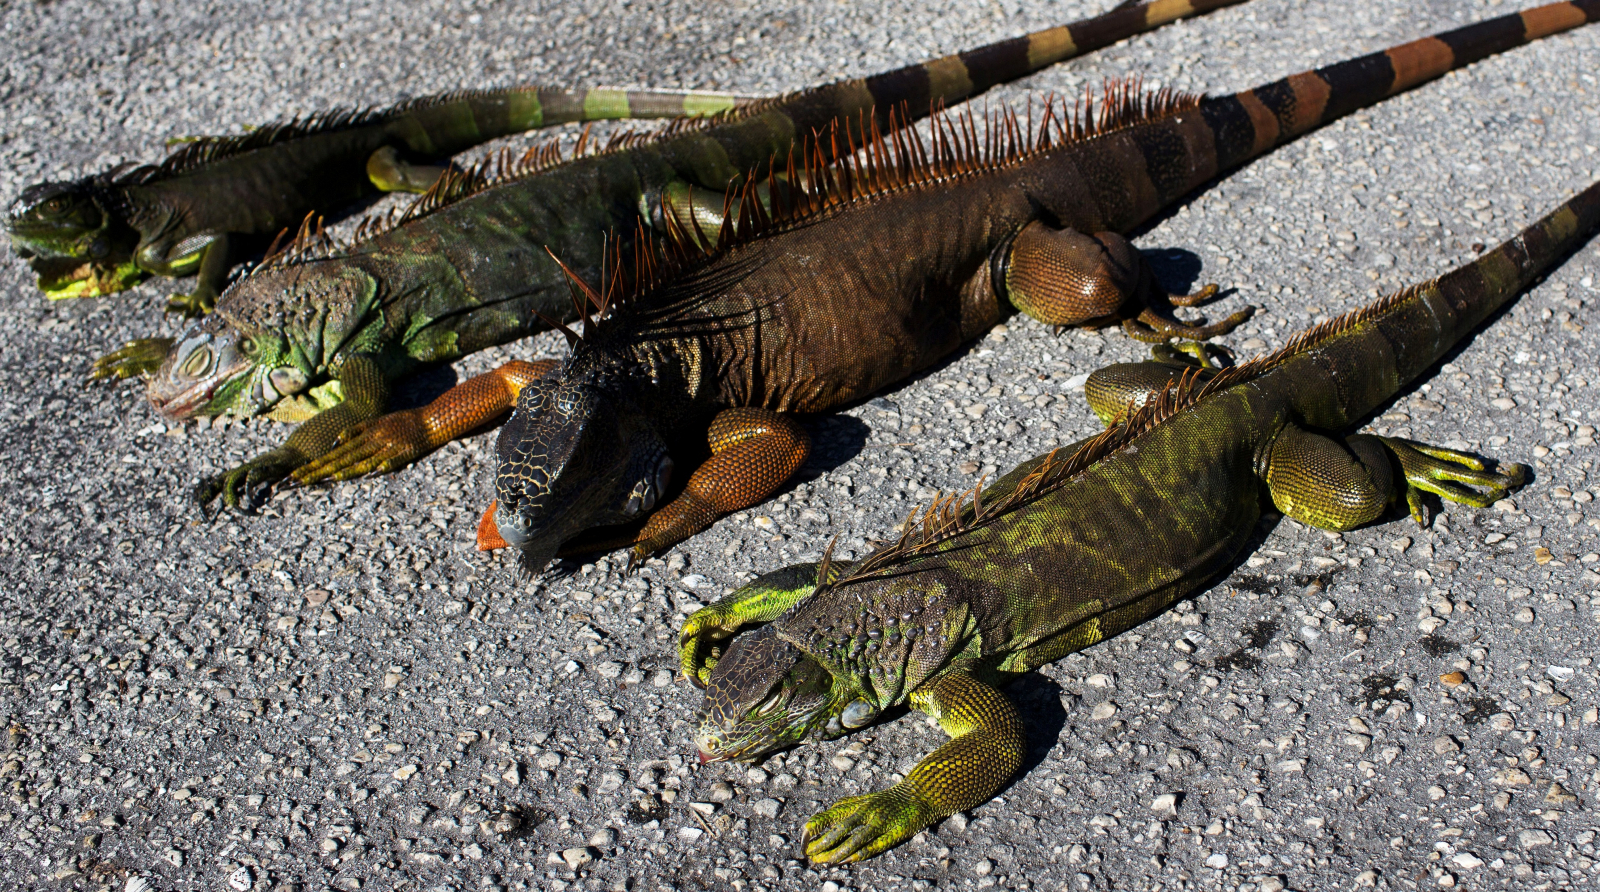 Frozen iguanas falling from trees in Florida due to extreme weather conditions